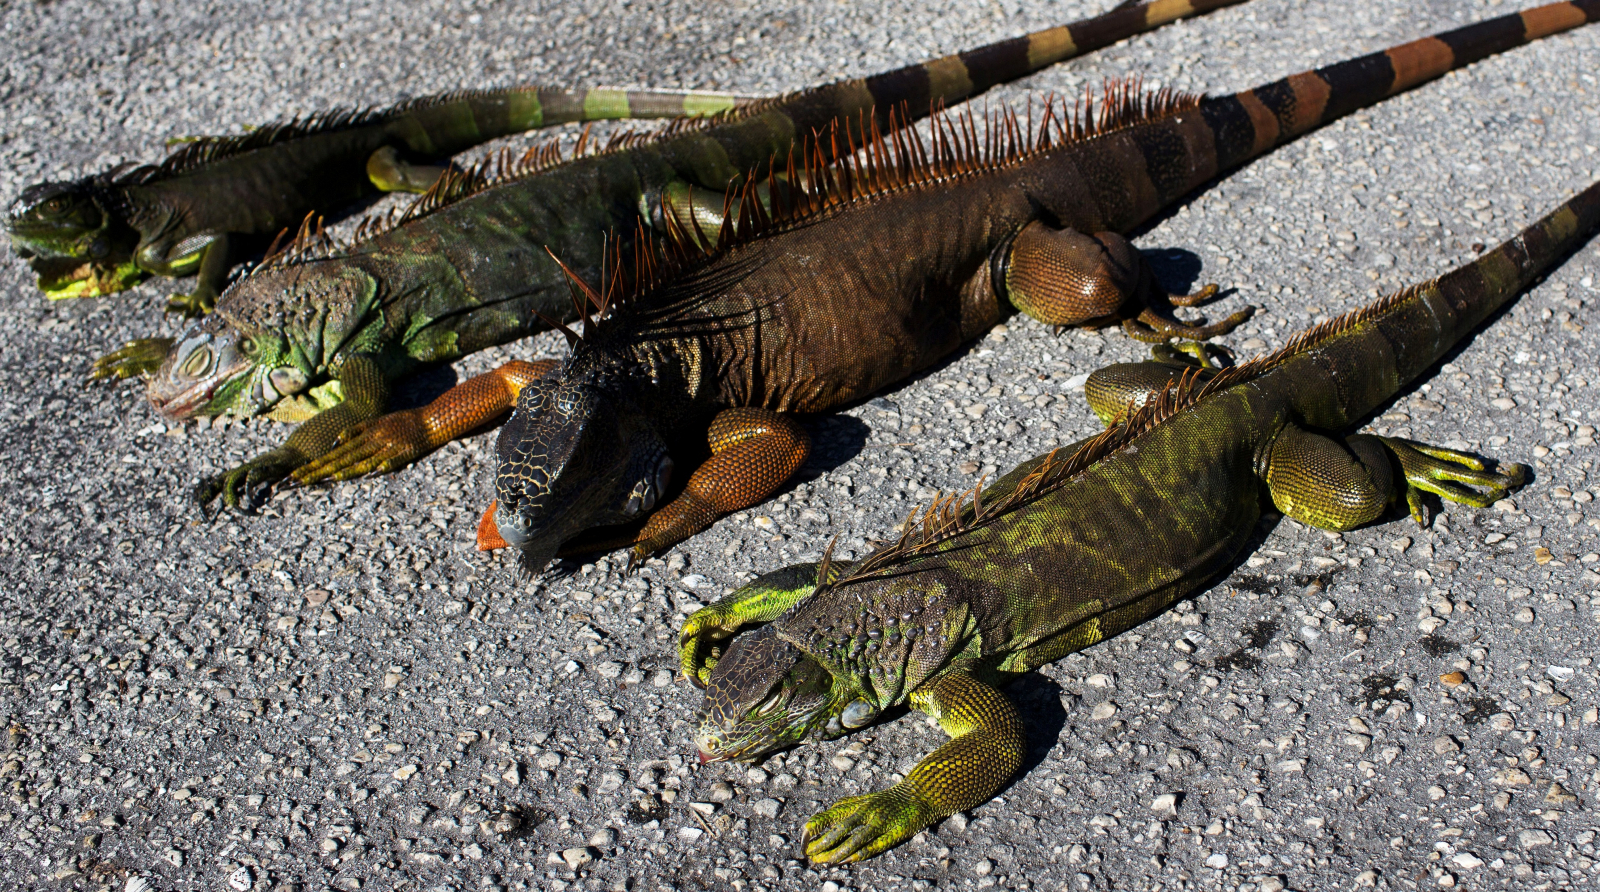 Frozen iguanas falling from trees in Florida due to extreme weather conditions